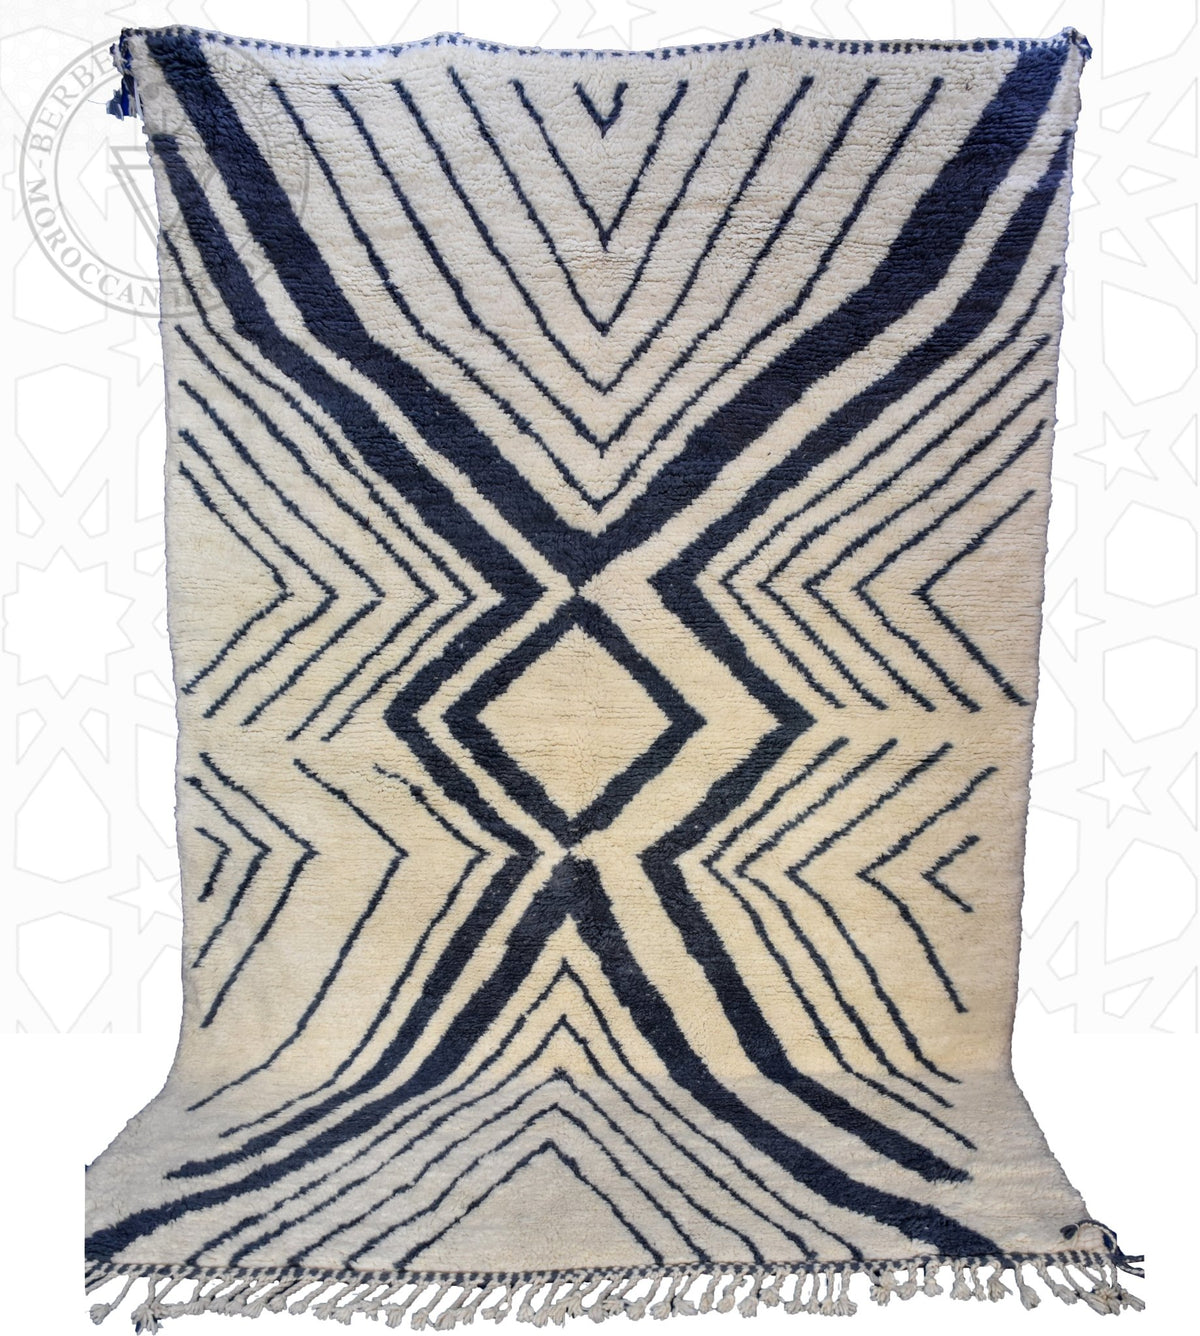 White and Blue Beni ourain Moroccan rug - 6.9 x 10.5 ft / 210 x